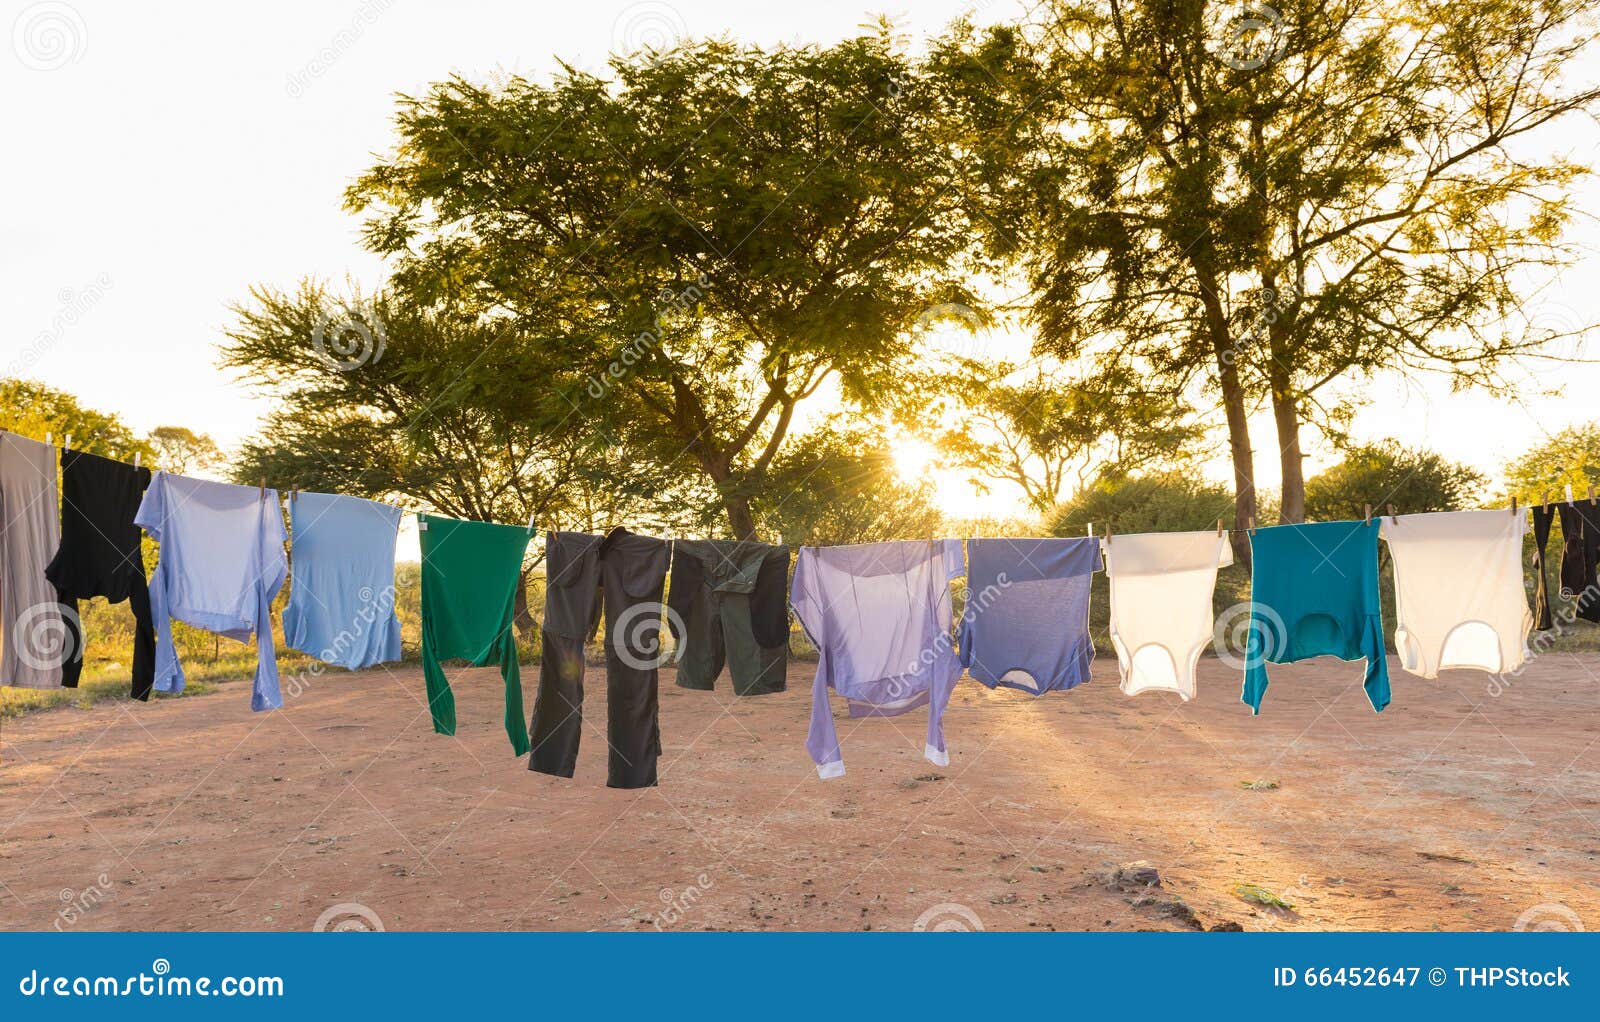 Laundry Drying on Outdoor Clothes Line Stock Image - Image of fresh, clothes:  66452647